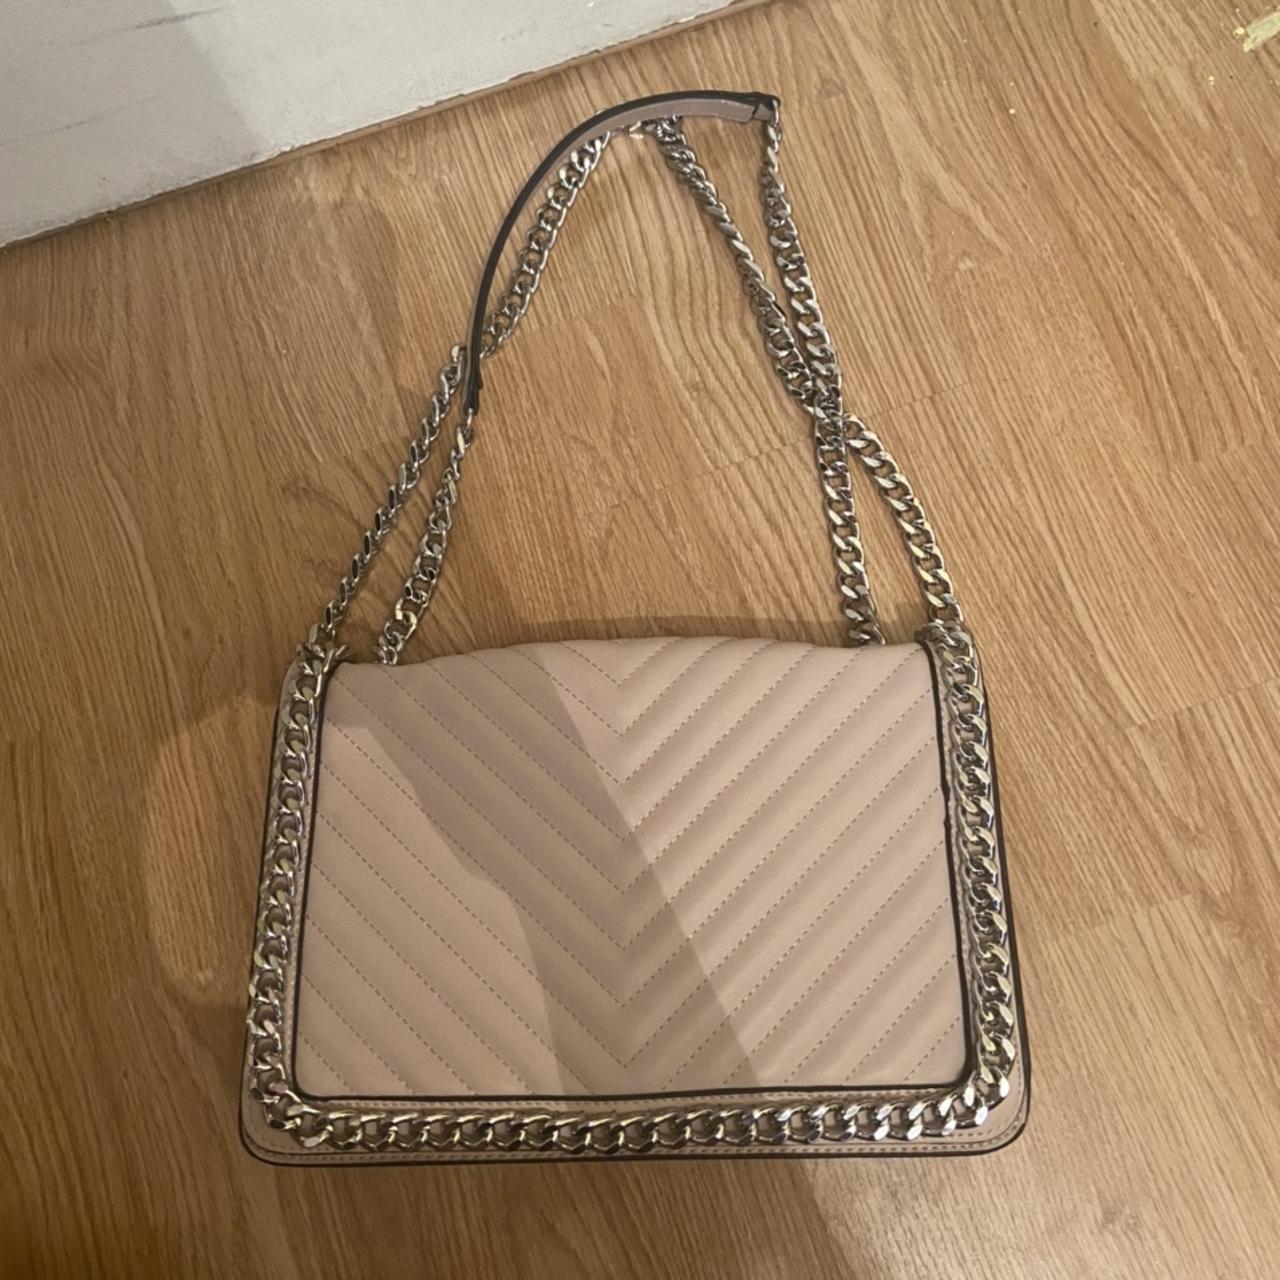 The Pros and Cons of Buying the Aldo Greenwald Crossbody Bag (My Honest  Review and Ratings) - HubPages